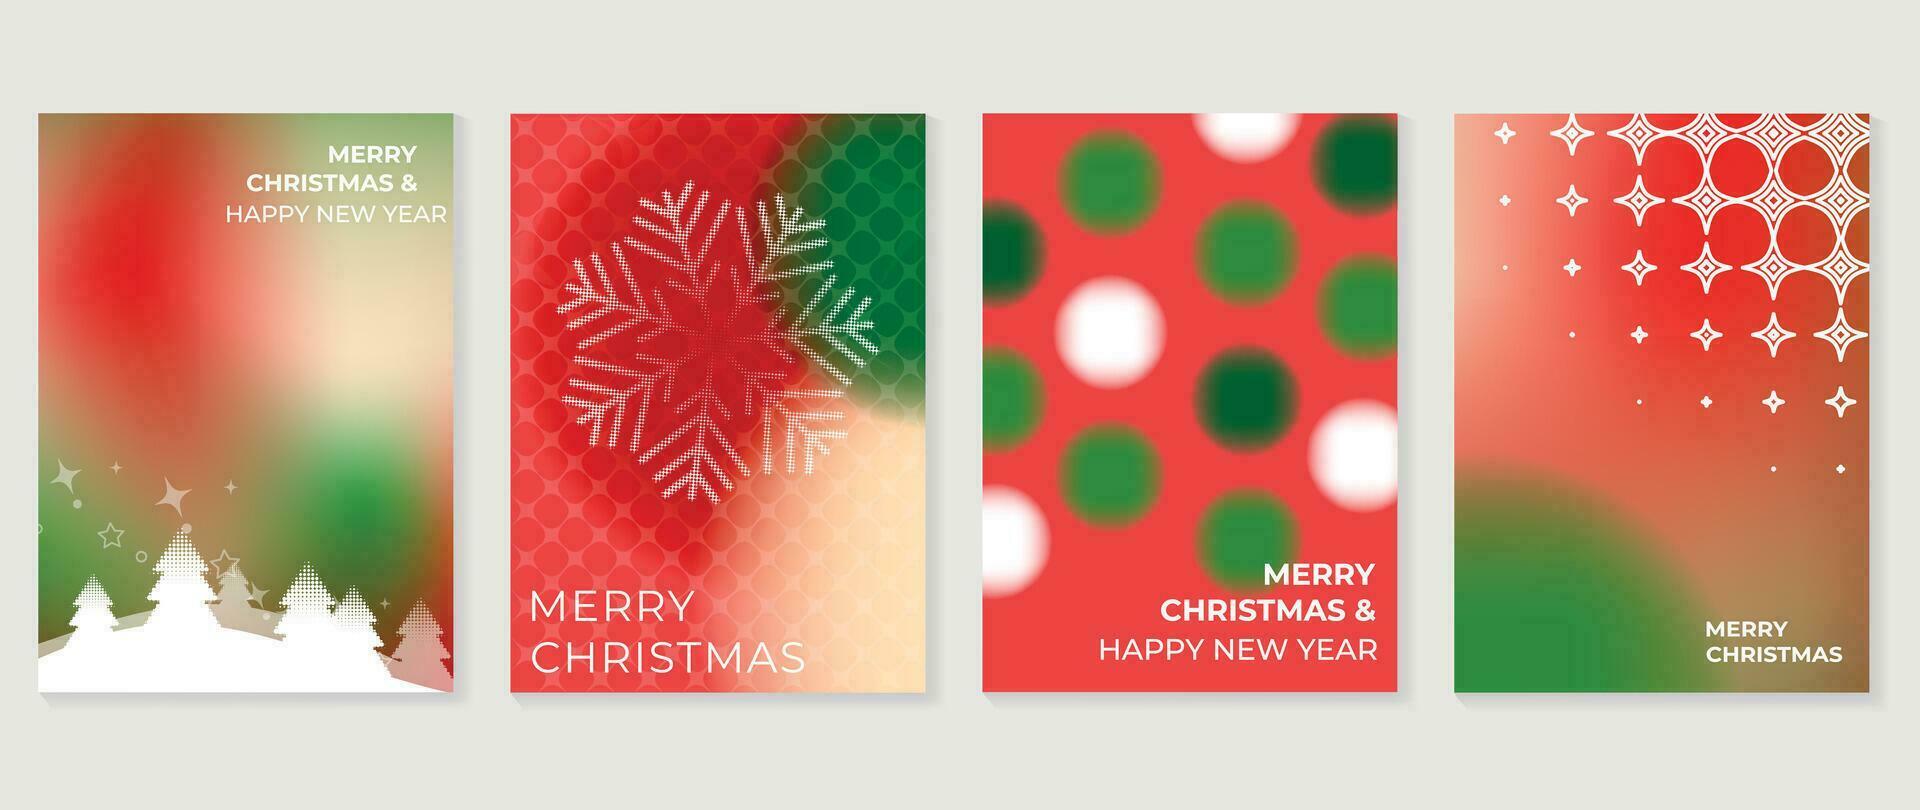 Merry christmas concept posters set. Cute gradient holographic background vector with vibrant color, christmas tree, snowflake. Art trendy wallpaper design for social media, card, banner, flyer.